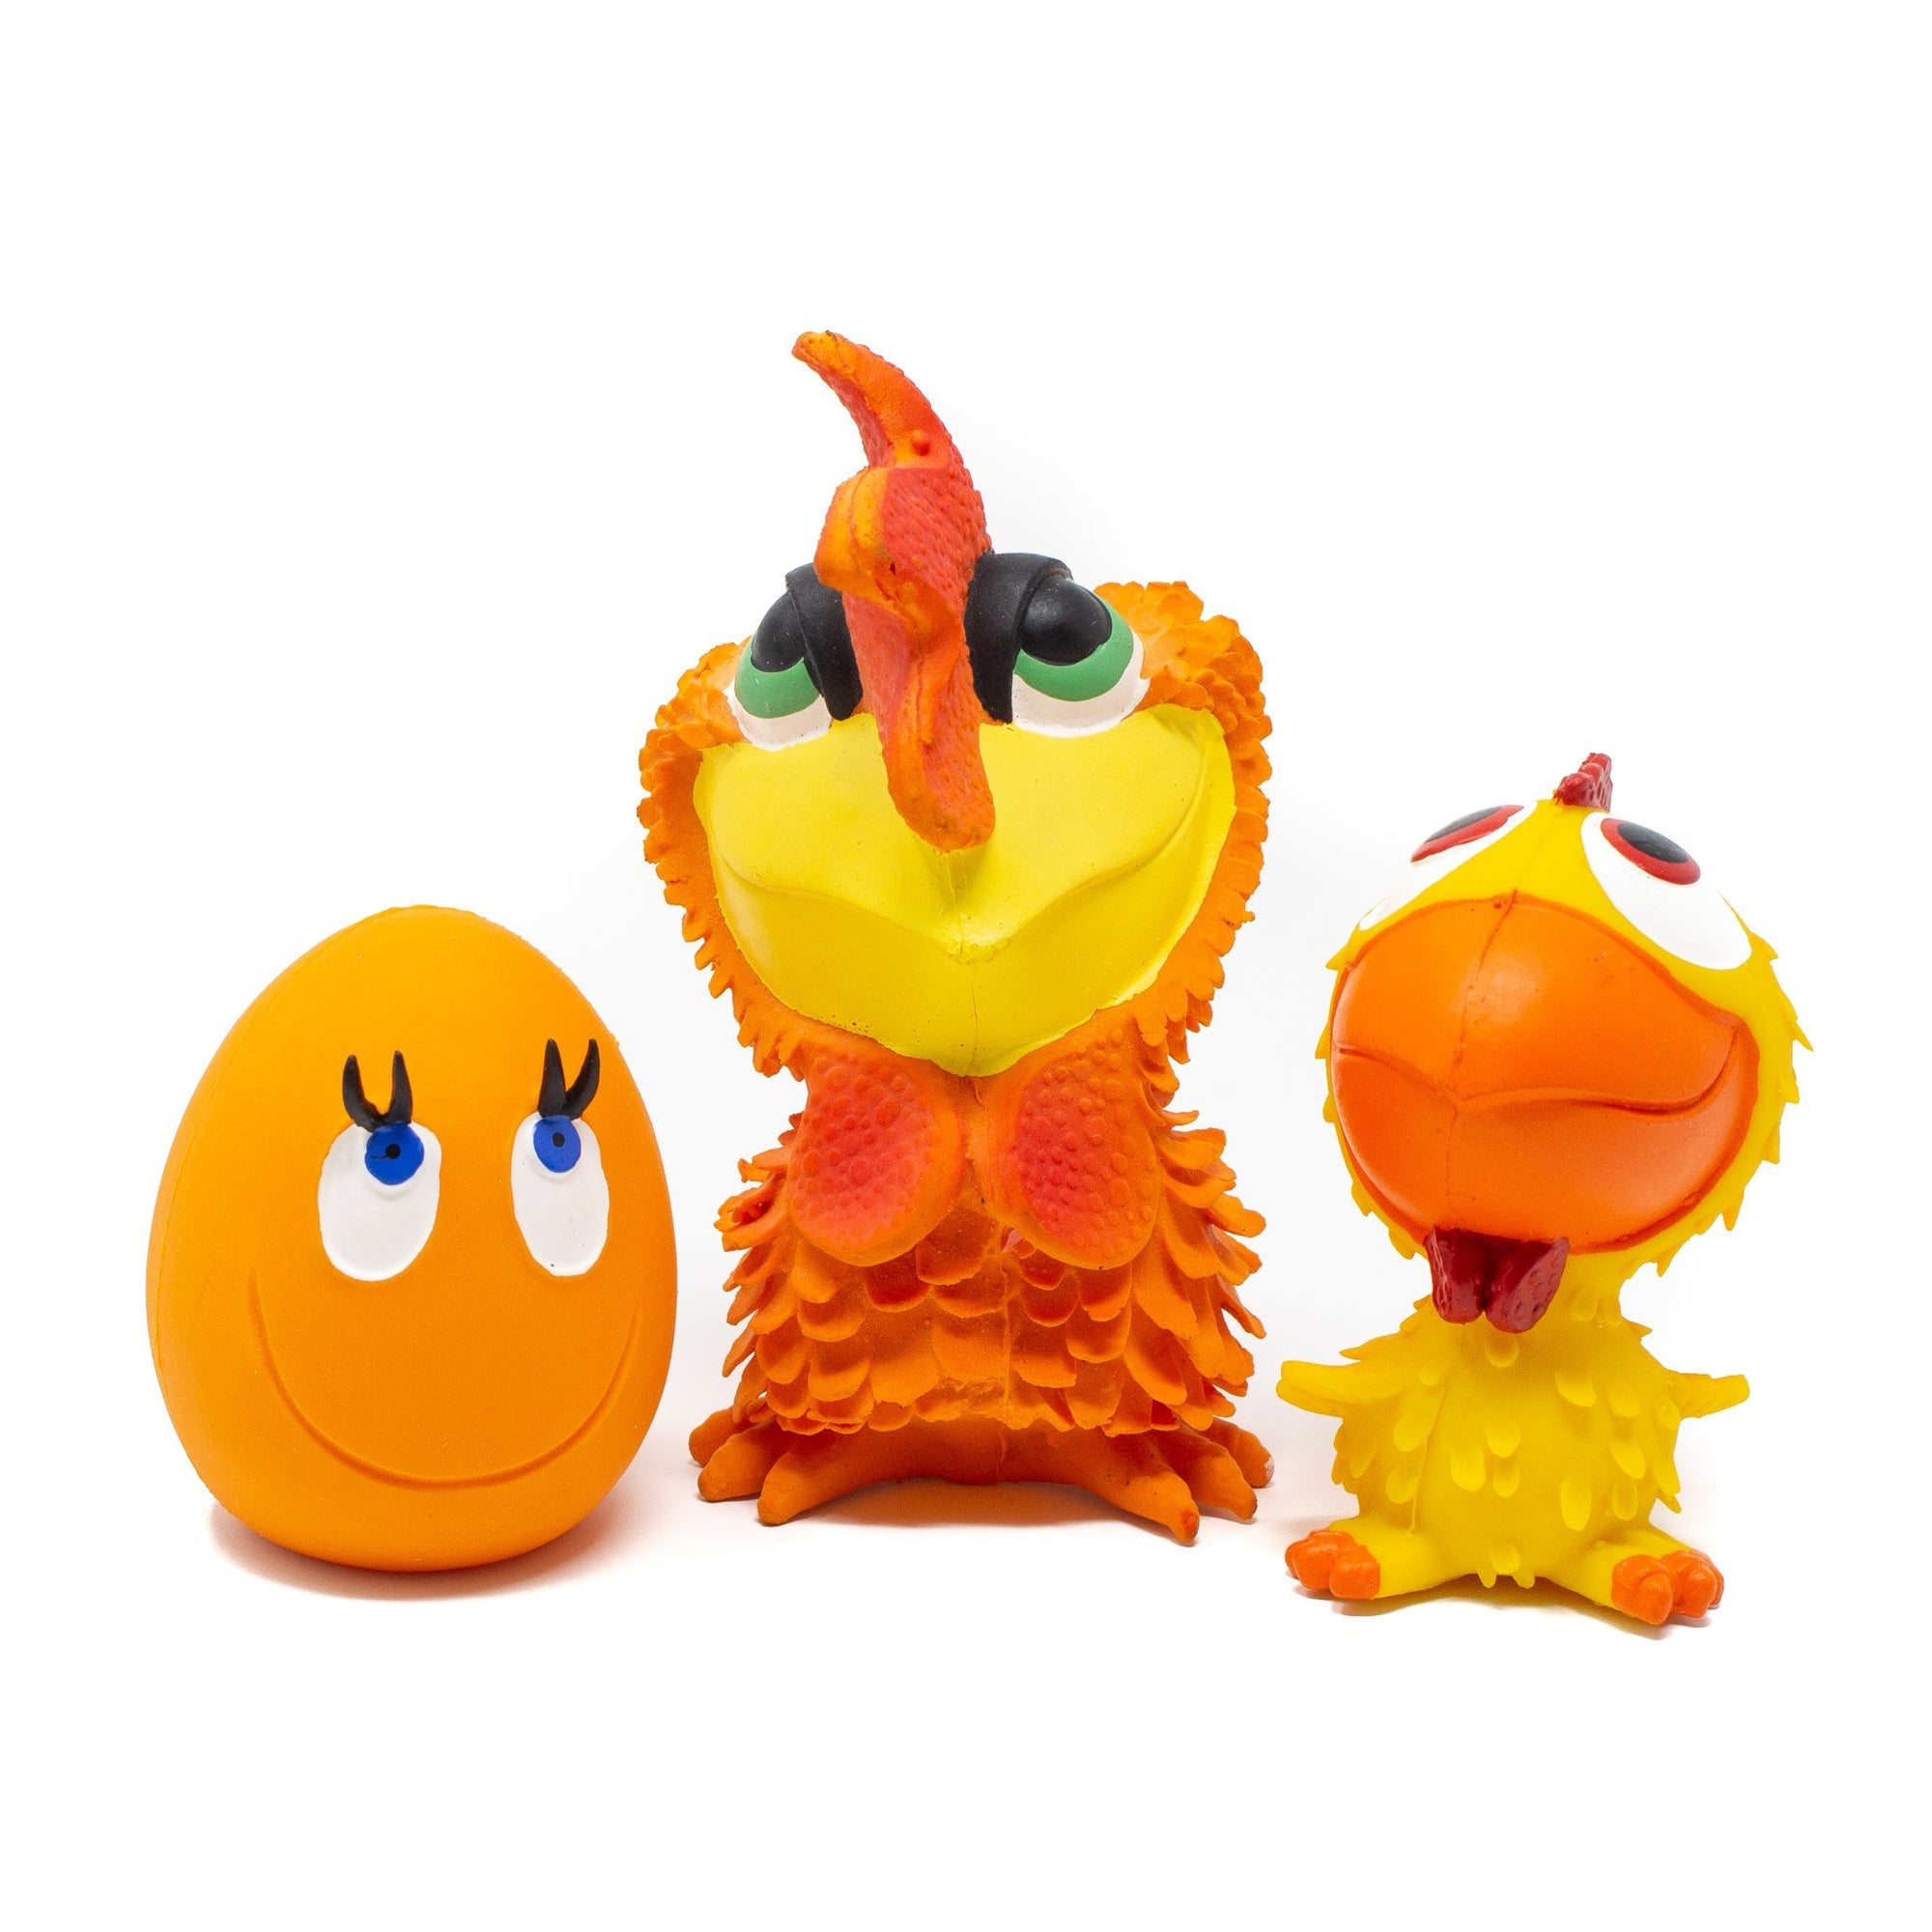 Pet 3-Set (OVO the Egg, Chick and Cockerel) - Natural Rubber Toys